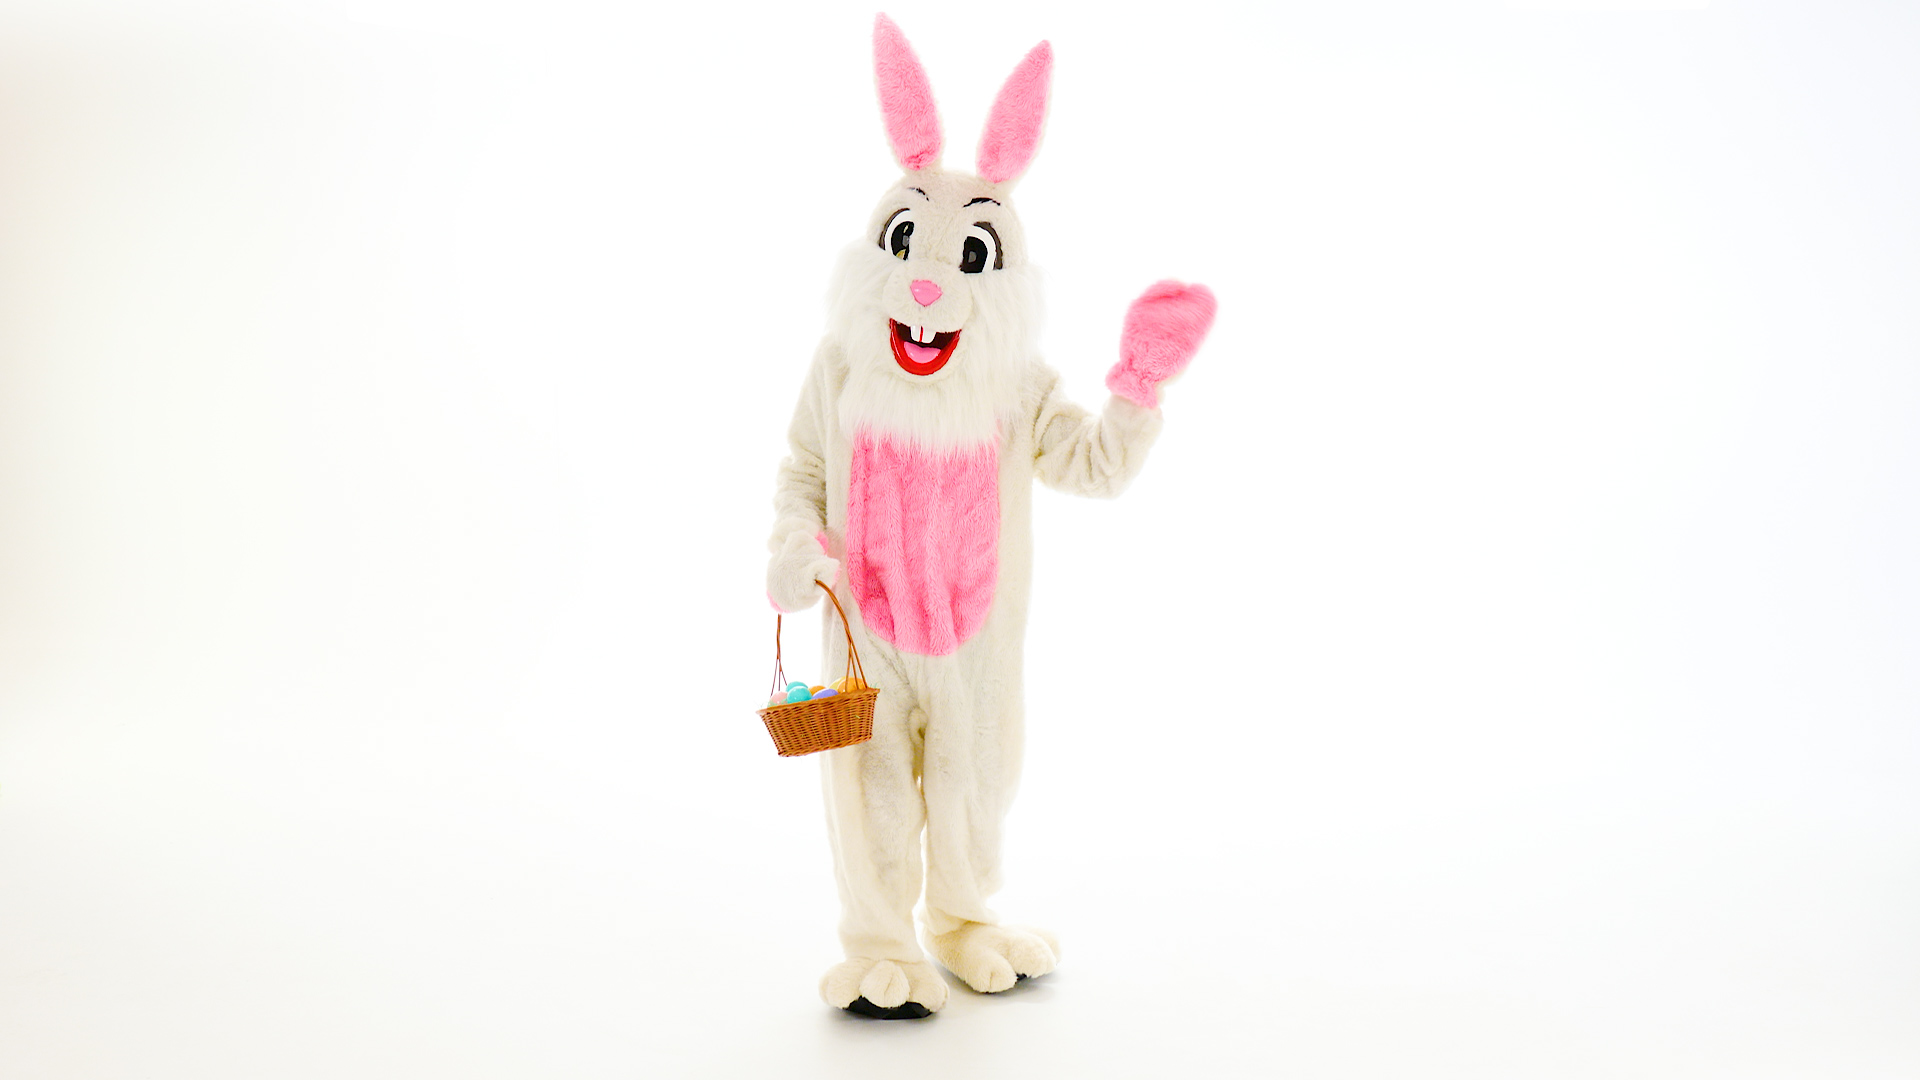 This Easter Bunny Mascot Costume is a high quality costume available at an affordable price!